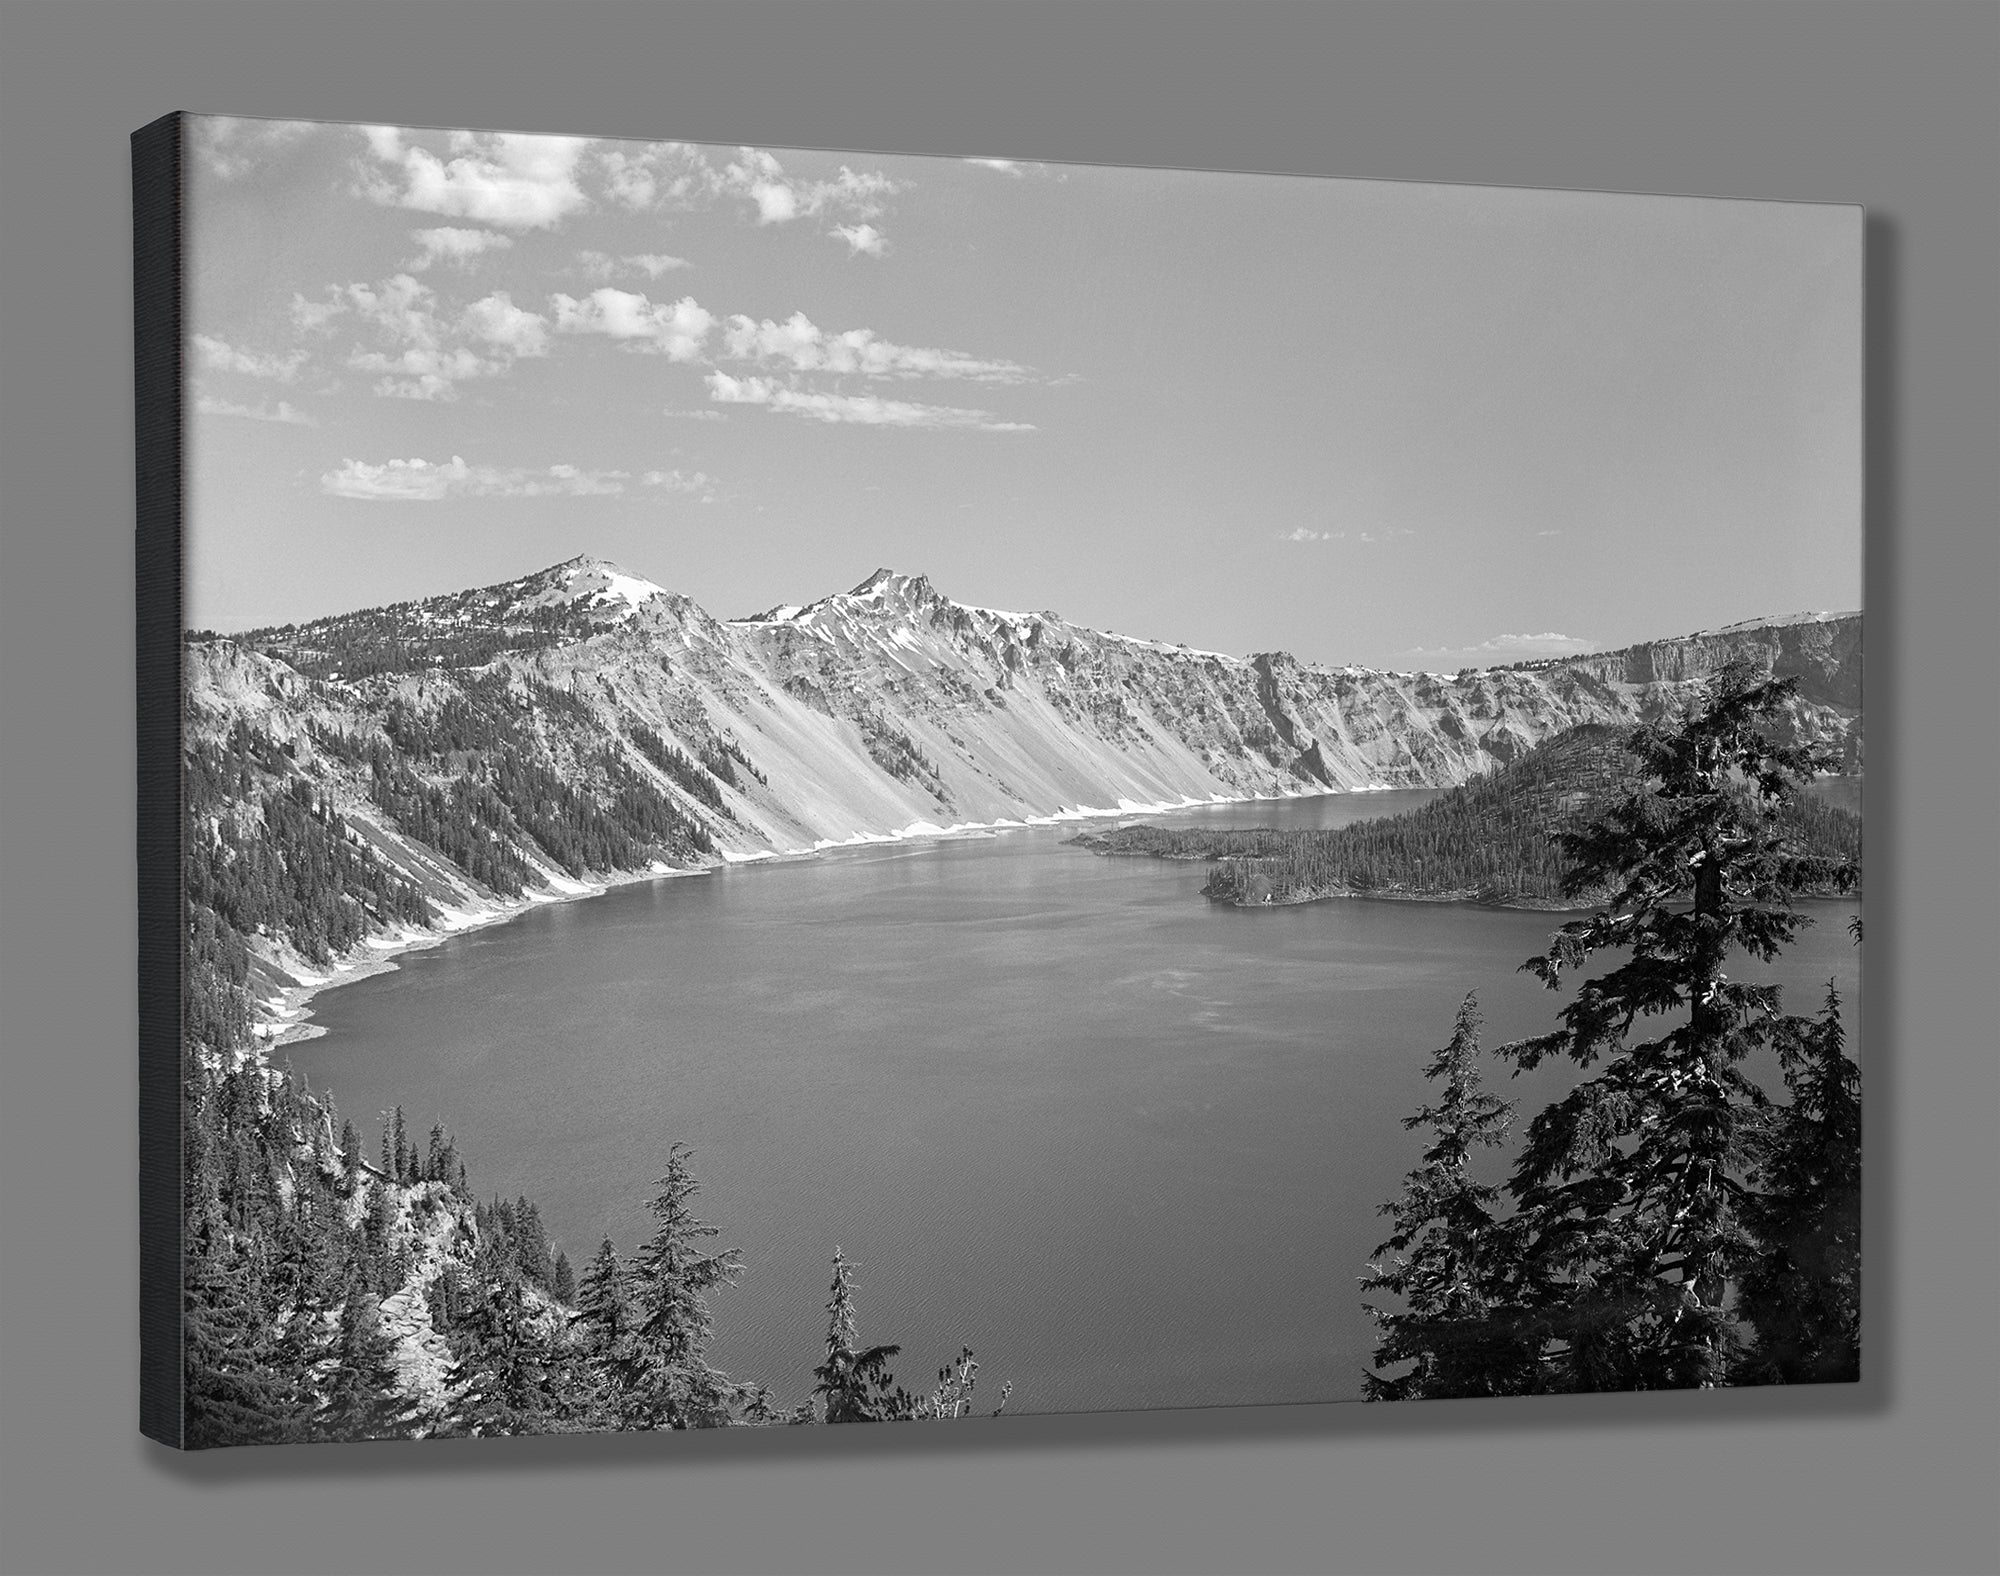 A canvas reproduction print of a vintage photograph of Crater Lake National Park